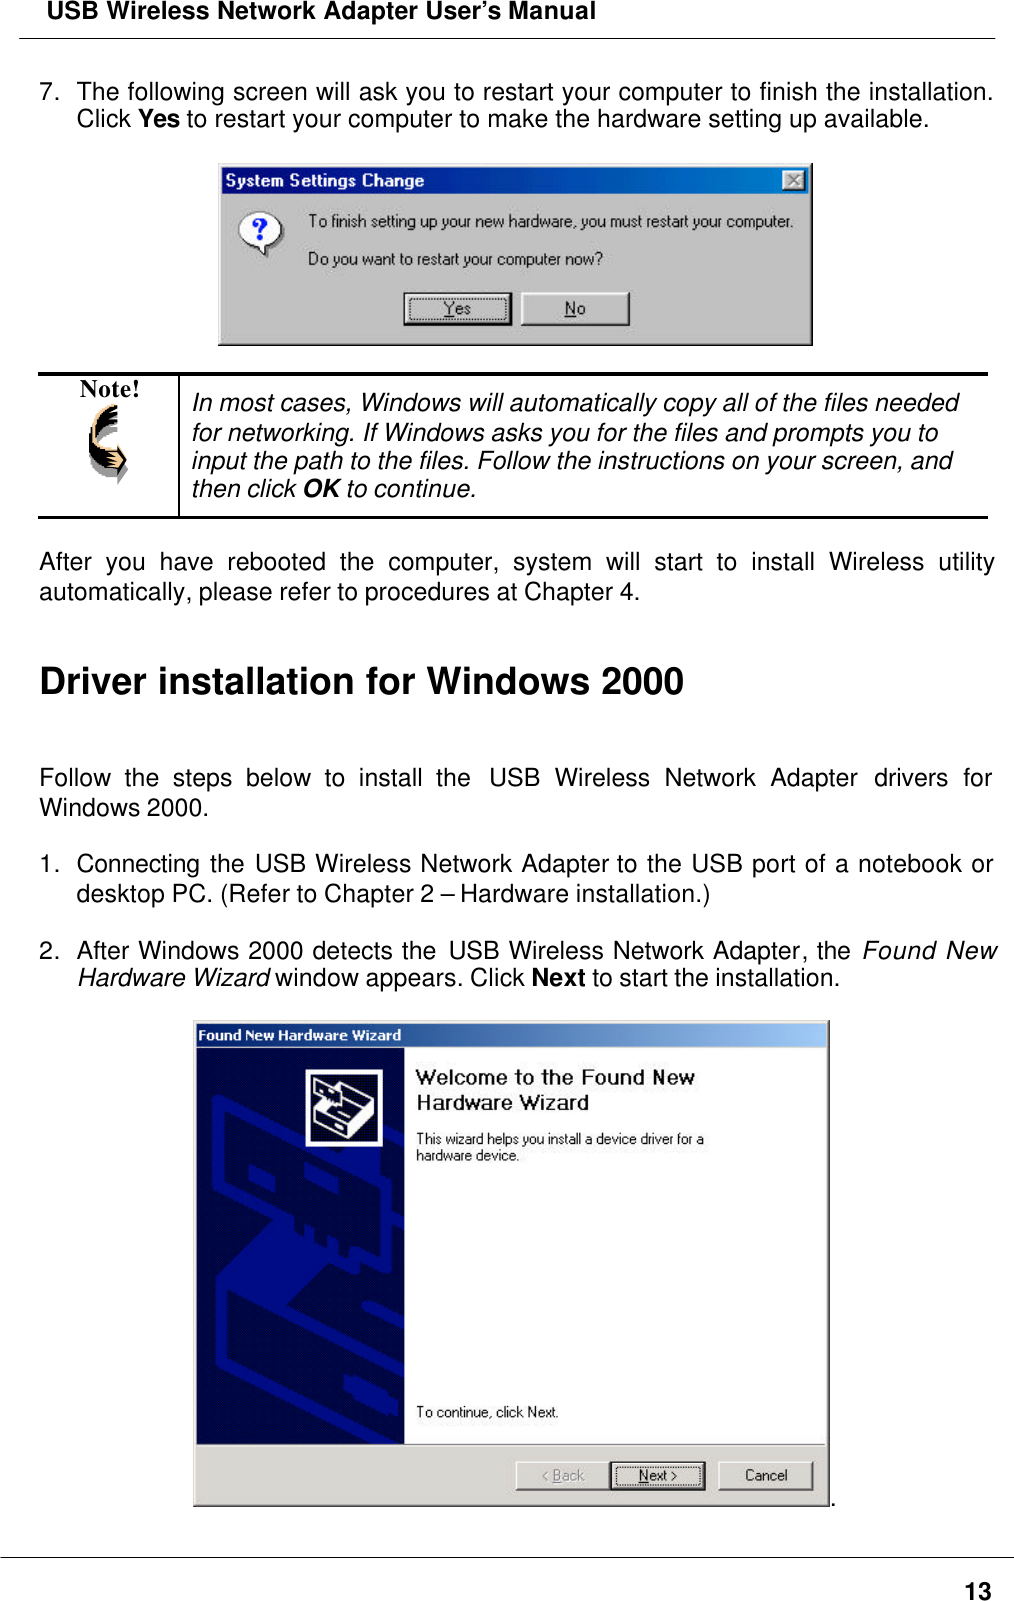  USB Wireless Network Adapter User’s Manual137. The following screen will ask you to restart your computer to finish the installation.Click Yes to restart your computer to make the hardware setting up available.Note! In most cases, Windows will automatically copy all of the files neededfor networking. If Windows asks you for the files and prompts you toinput the path to the files. Follow the instructions on your screen, andthen click OK to continue.After you have rebooted the computer, system will start to install Wireless utilityautomatically, please refer to procedures at Chapter 4.Driver installation for Windows 2000Follow the steps below to install the  USB Wireless Network Adapter drivers forWindows 2000.1. Connecting the USB Wireless Network Adapter to the USB port of a notebook ordesktop PC. (Refer to Chapter 2 – Hardware installation.)2. After Windows 2000 detects the USB Wireless Network Adapter, the Found NewHardware Wizard window appears. Click Next to start the installation..